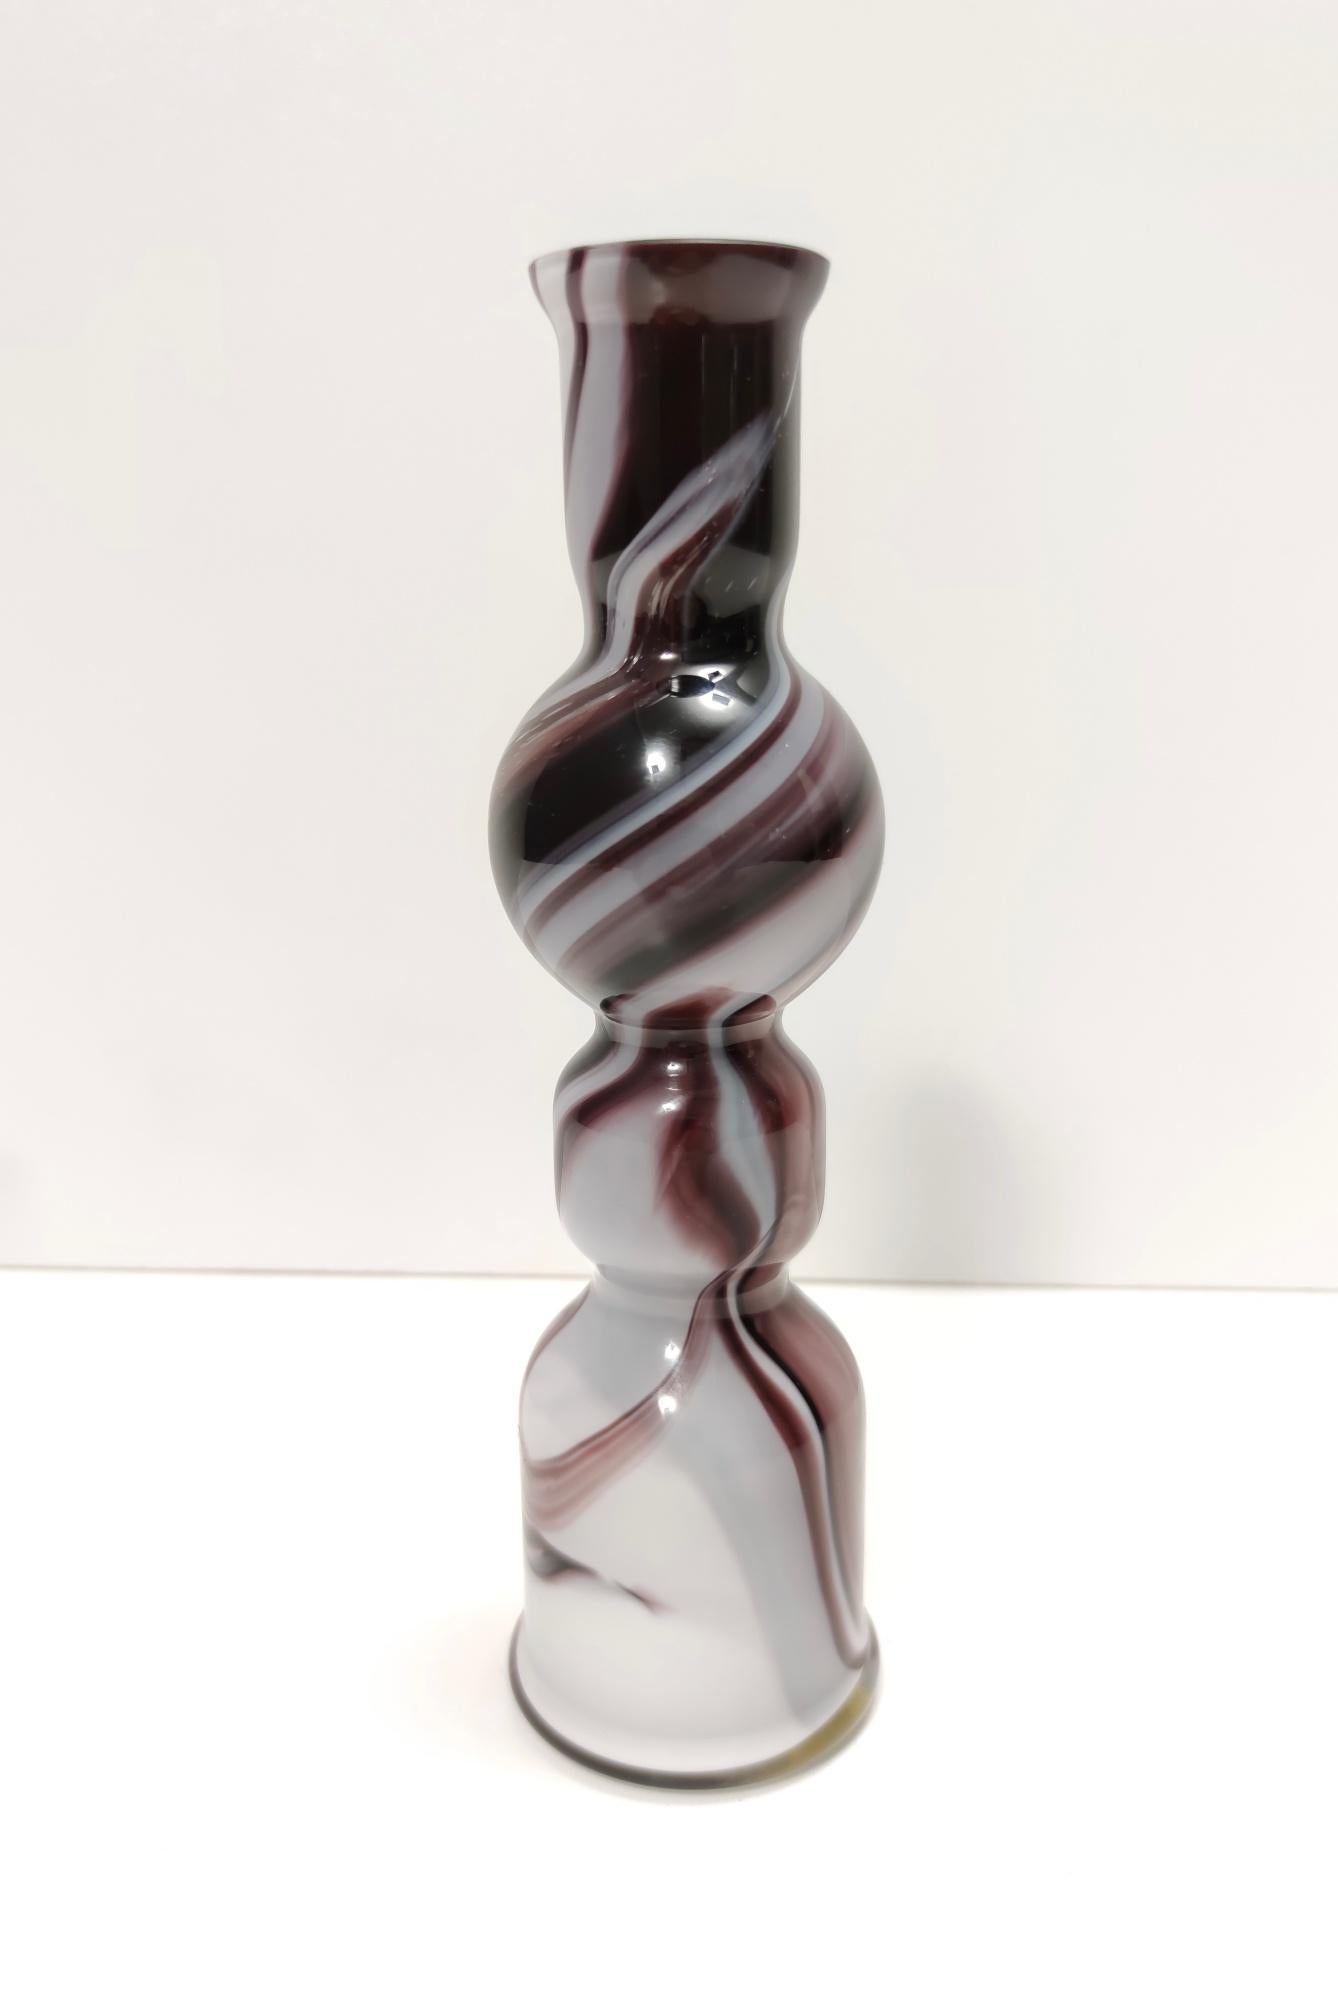 Late 20th Century Postmodern Purple and White Murano Glass Vase “Wave” by Carlo Moretti, Italy For Sale